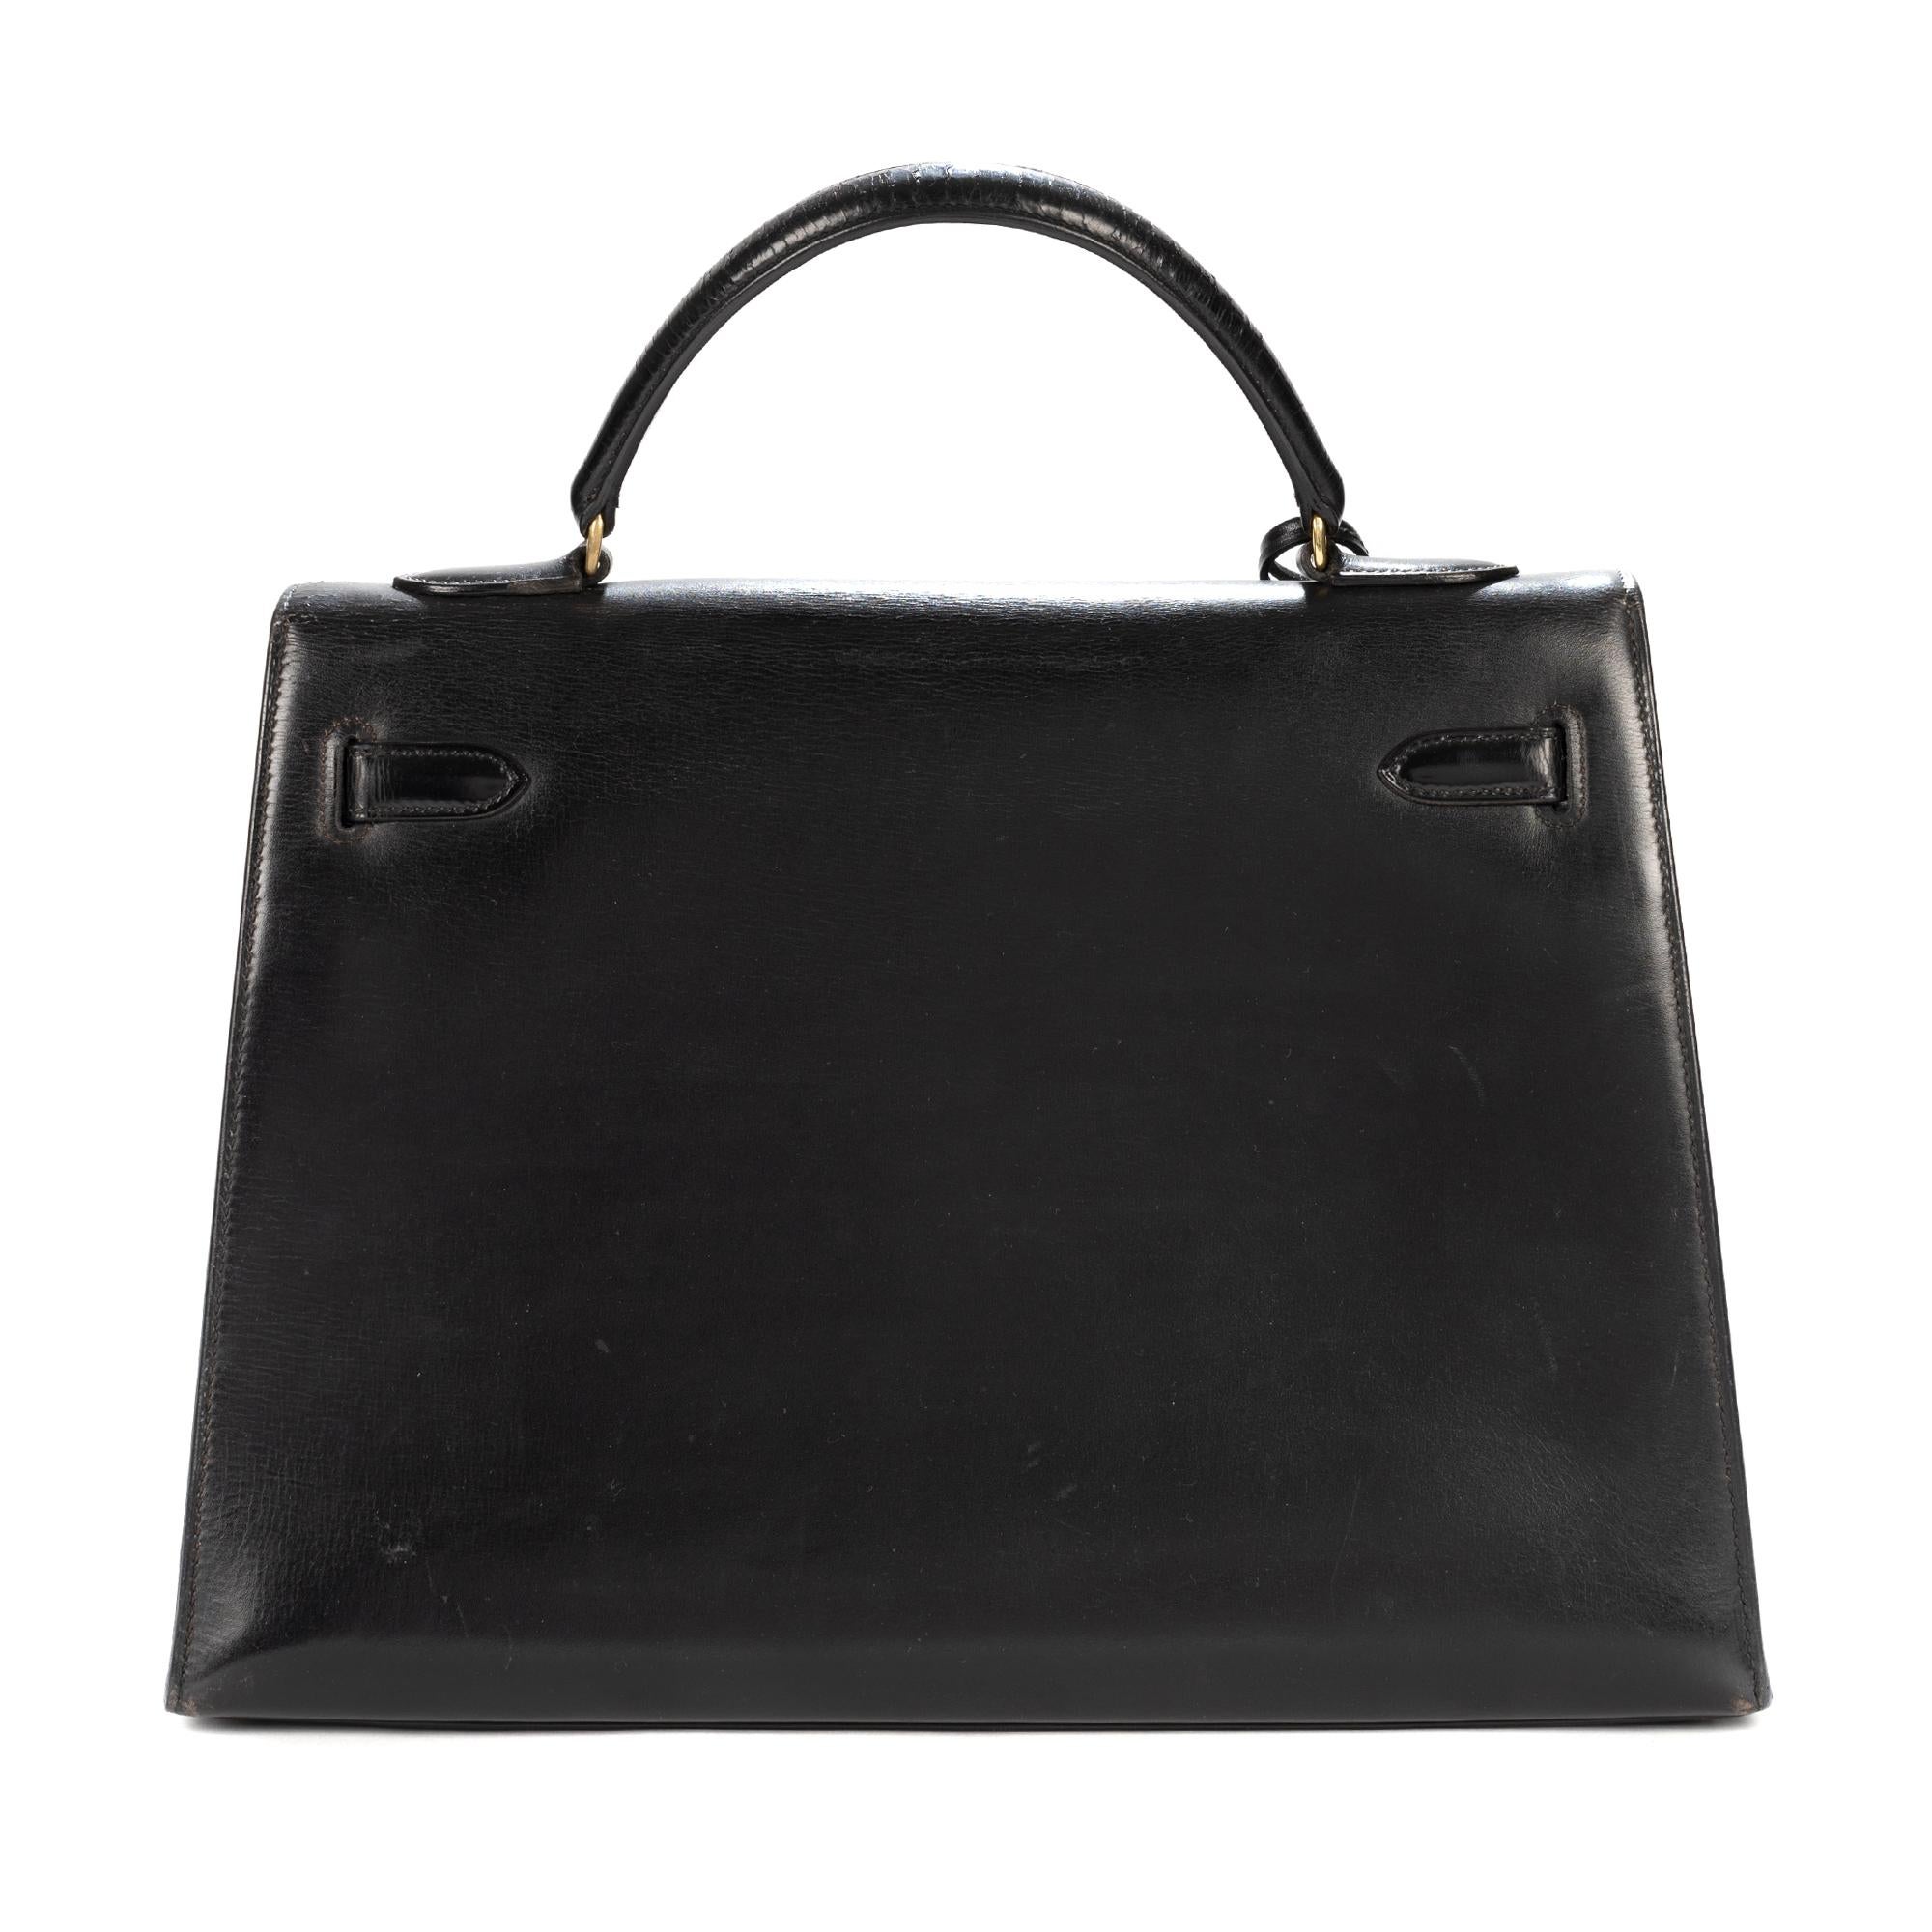 Beautiful Hermes Kelly 32 cm sellier in black box calfskin, gold hardware, simple handle in black leather, allowing for a hand support. 
Closure by flap.
Inside lining in black leather, a zipped pocket, a double clad pocket. 
Comes with Tirette,